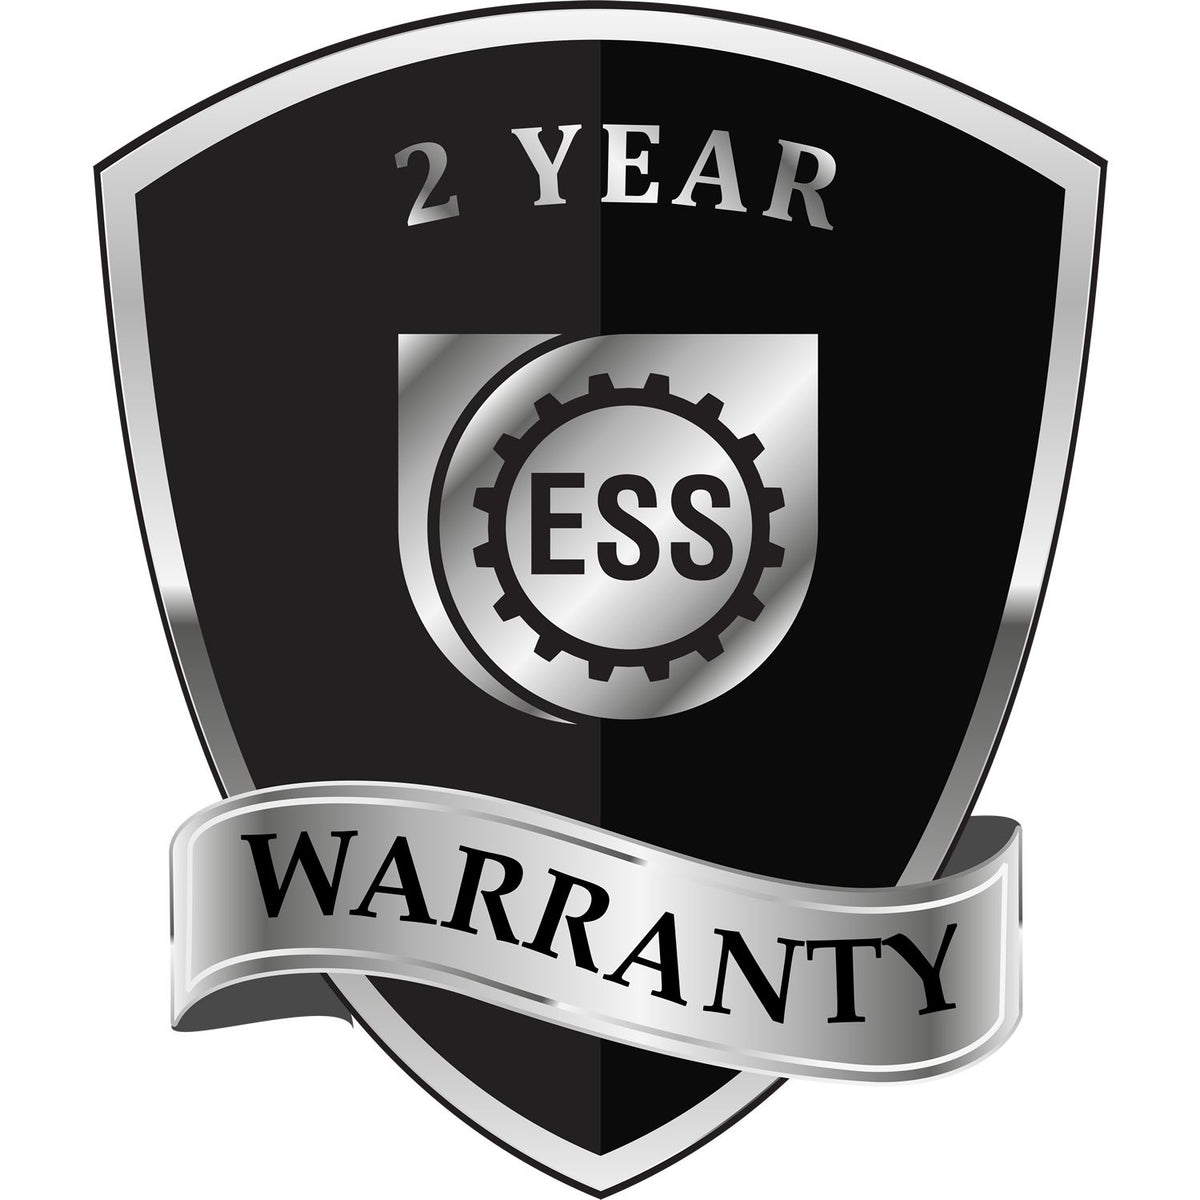 A black and silver badge or emblem showing warranty information for the Handheld New Jersey Professional Geologist Embosser